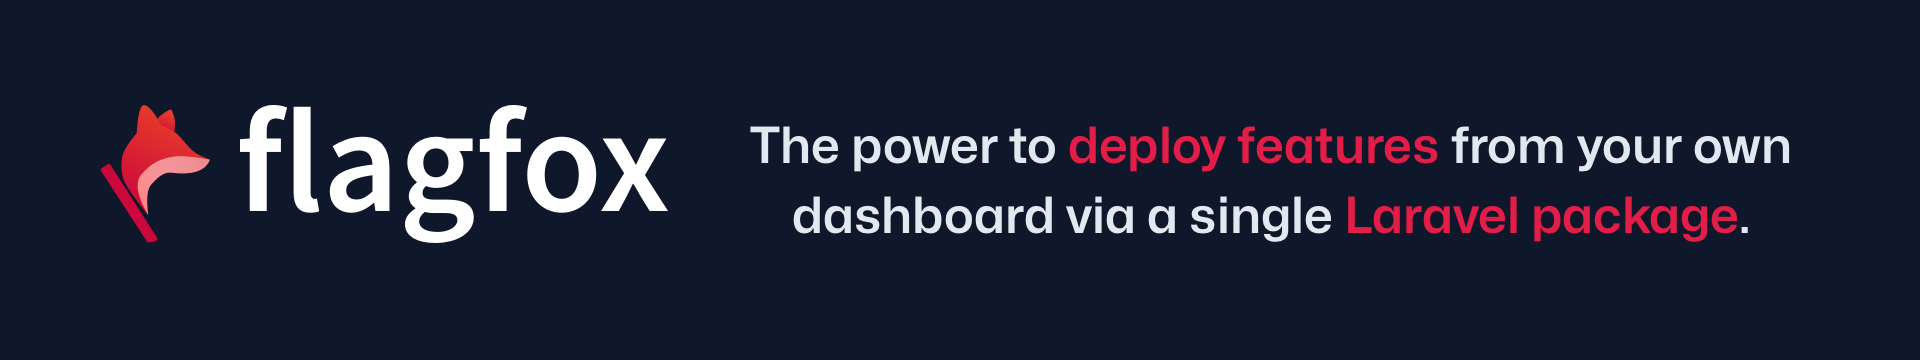 flagfox - the power to deploy features form your own dashboard via a single Laravel package